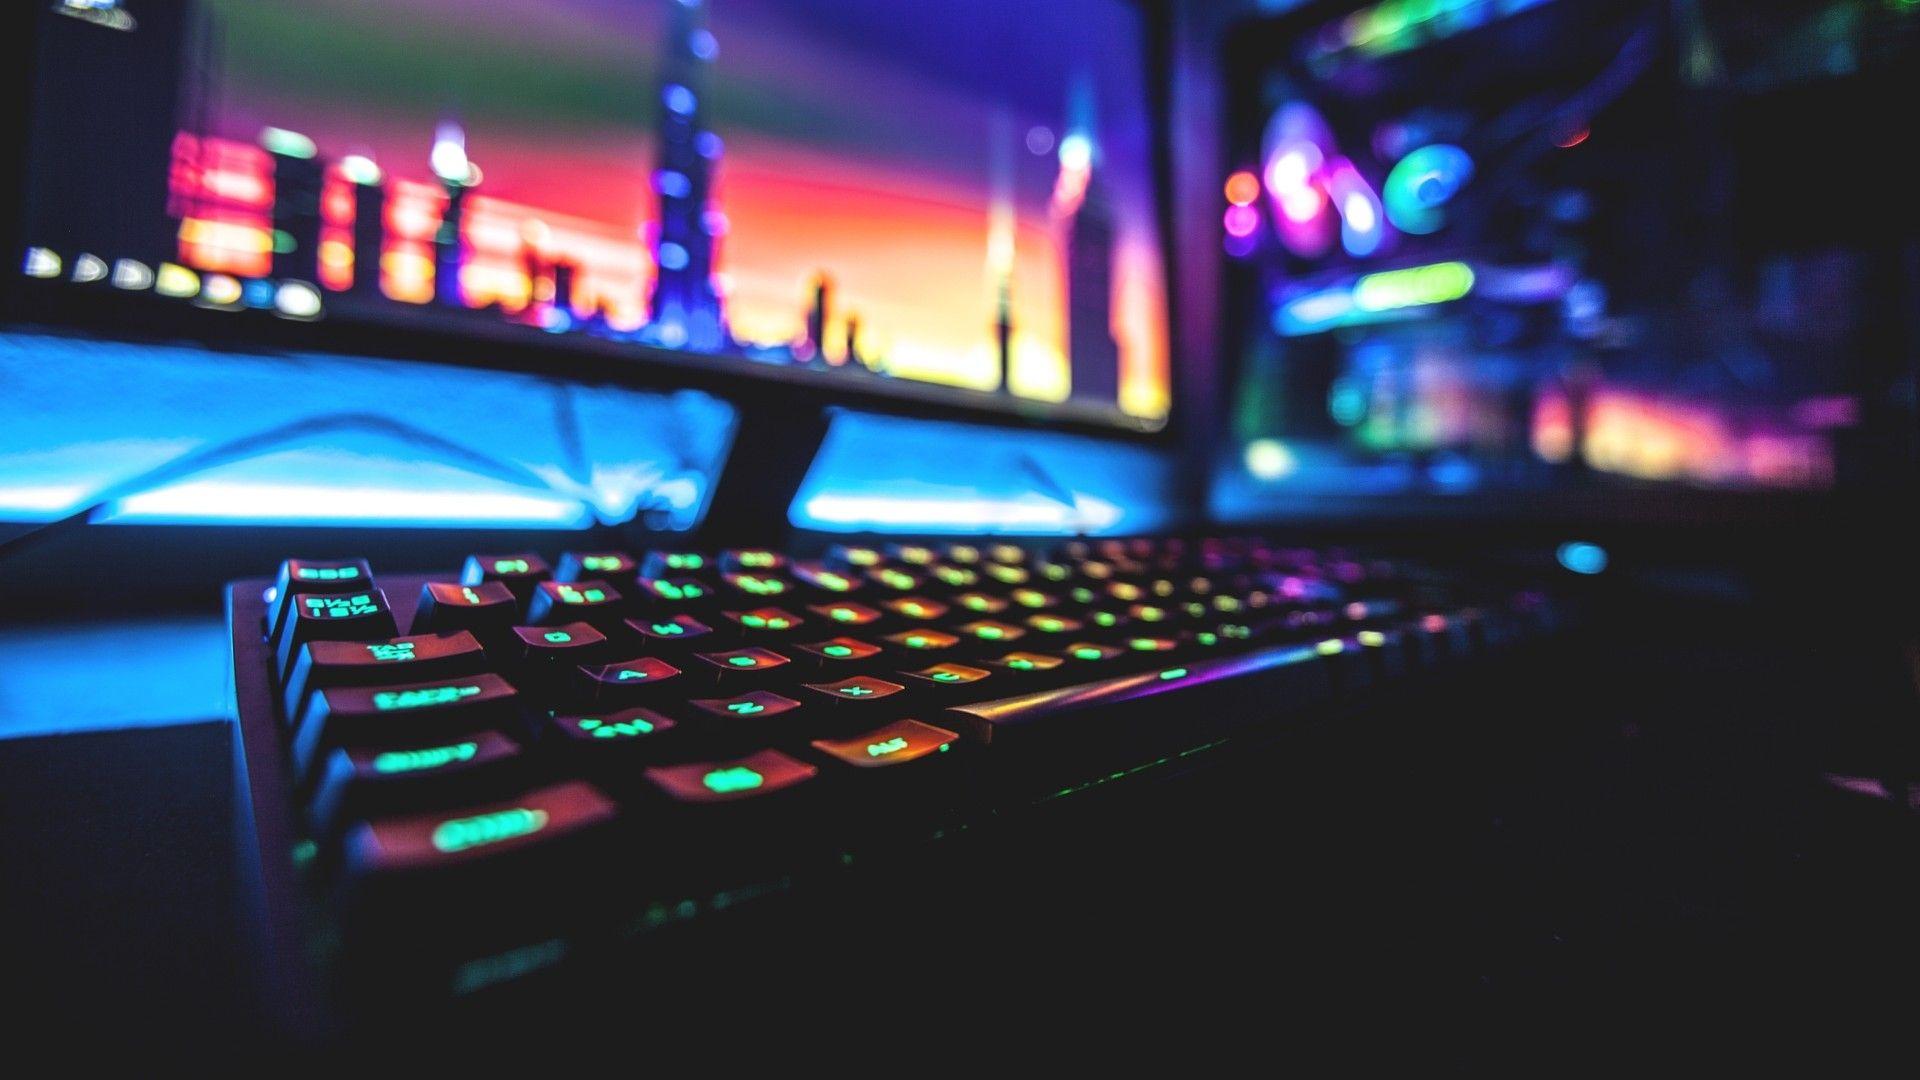 Wallpaper 4K Gaming Setup / Best gaming images in hd 1920x1080 and 4k